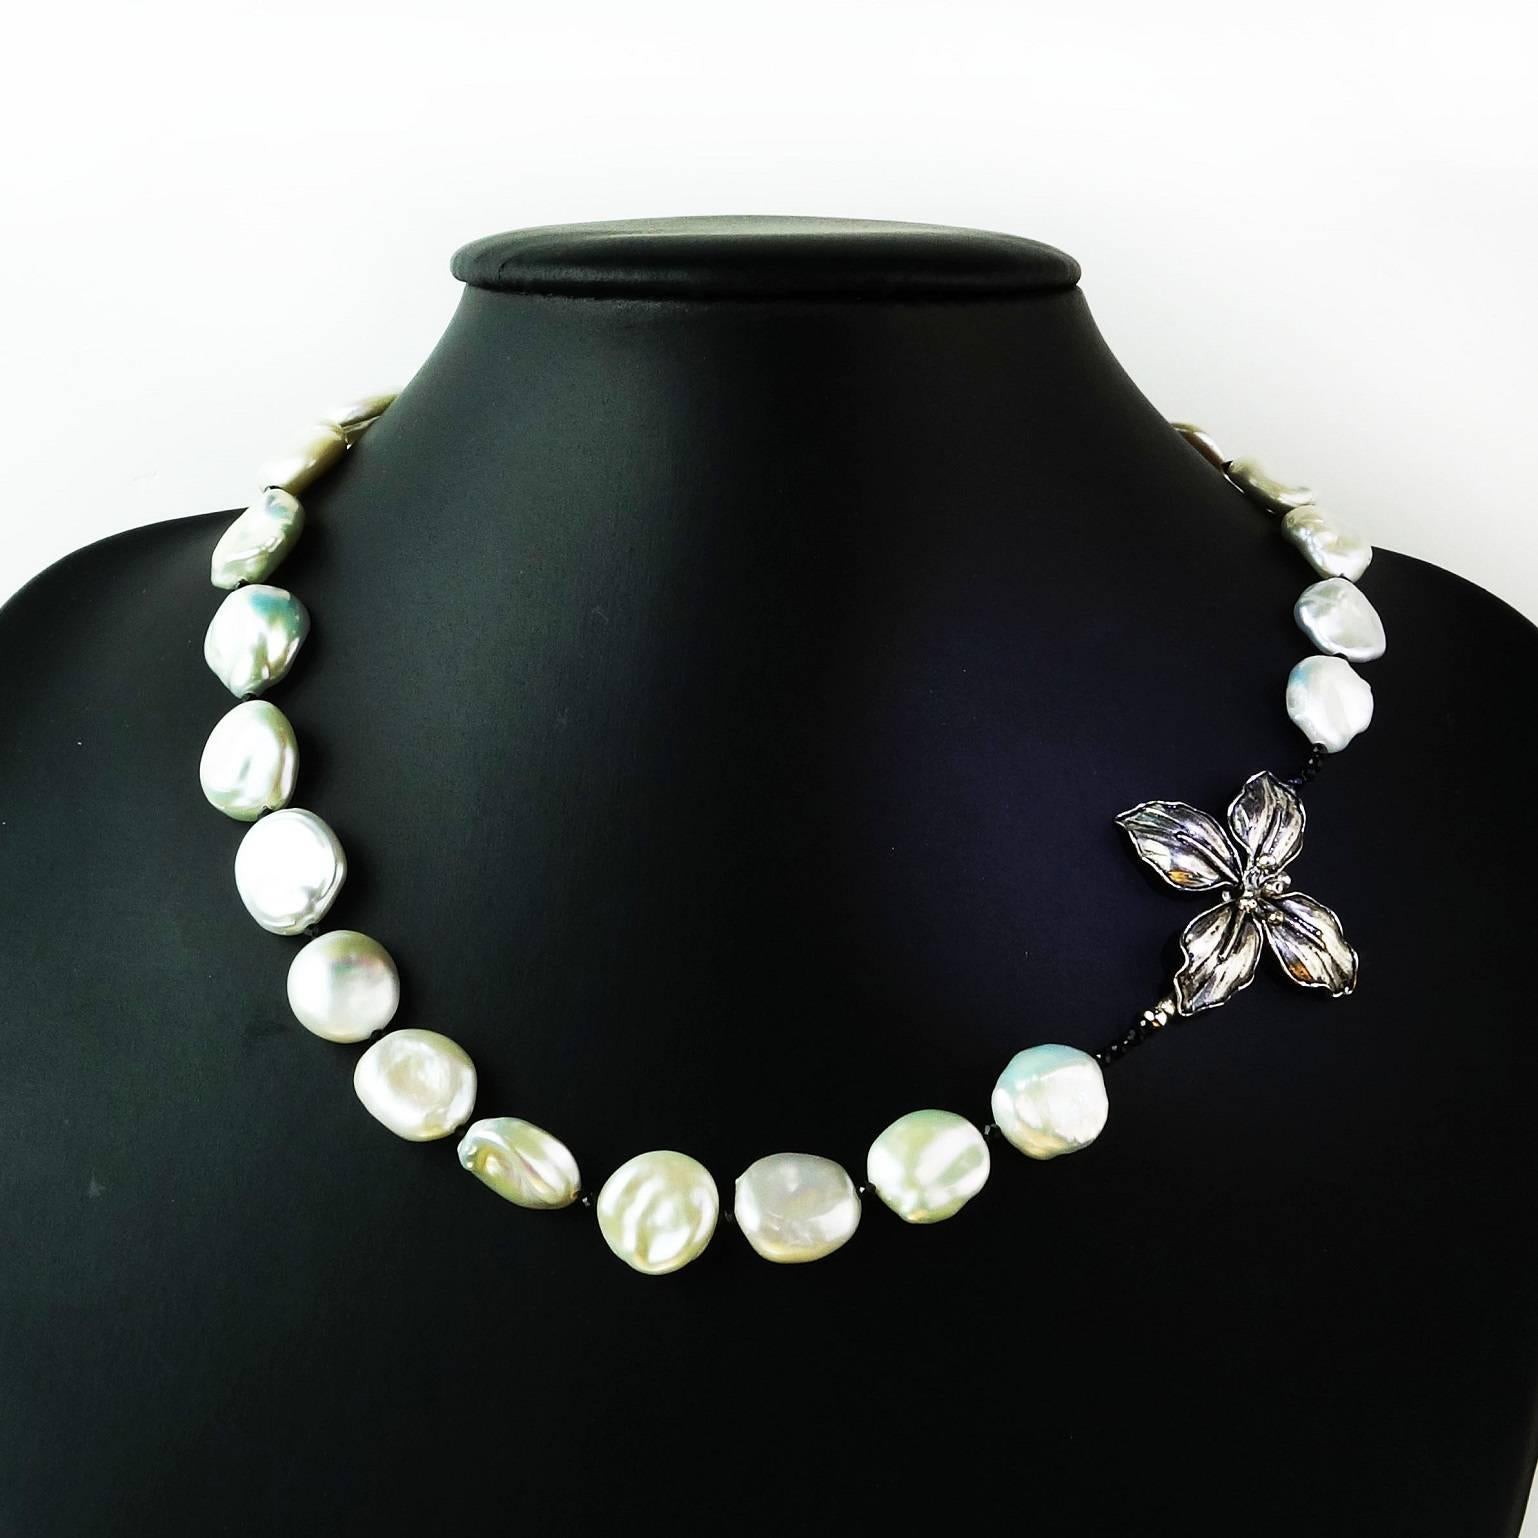 Women's White Iridescent Freshwater Pearls with Black Spinel Accents Necklace